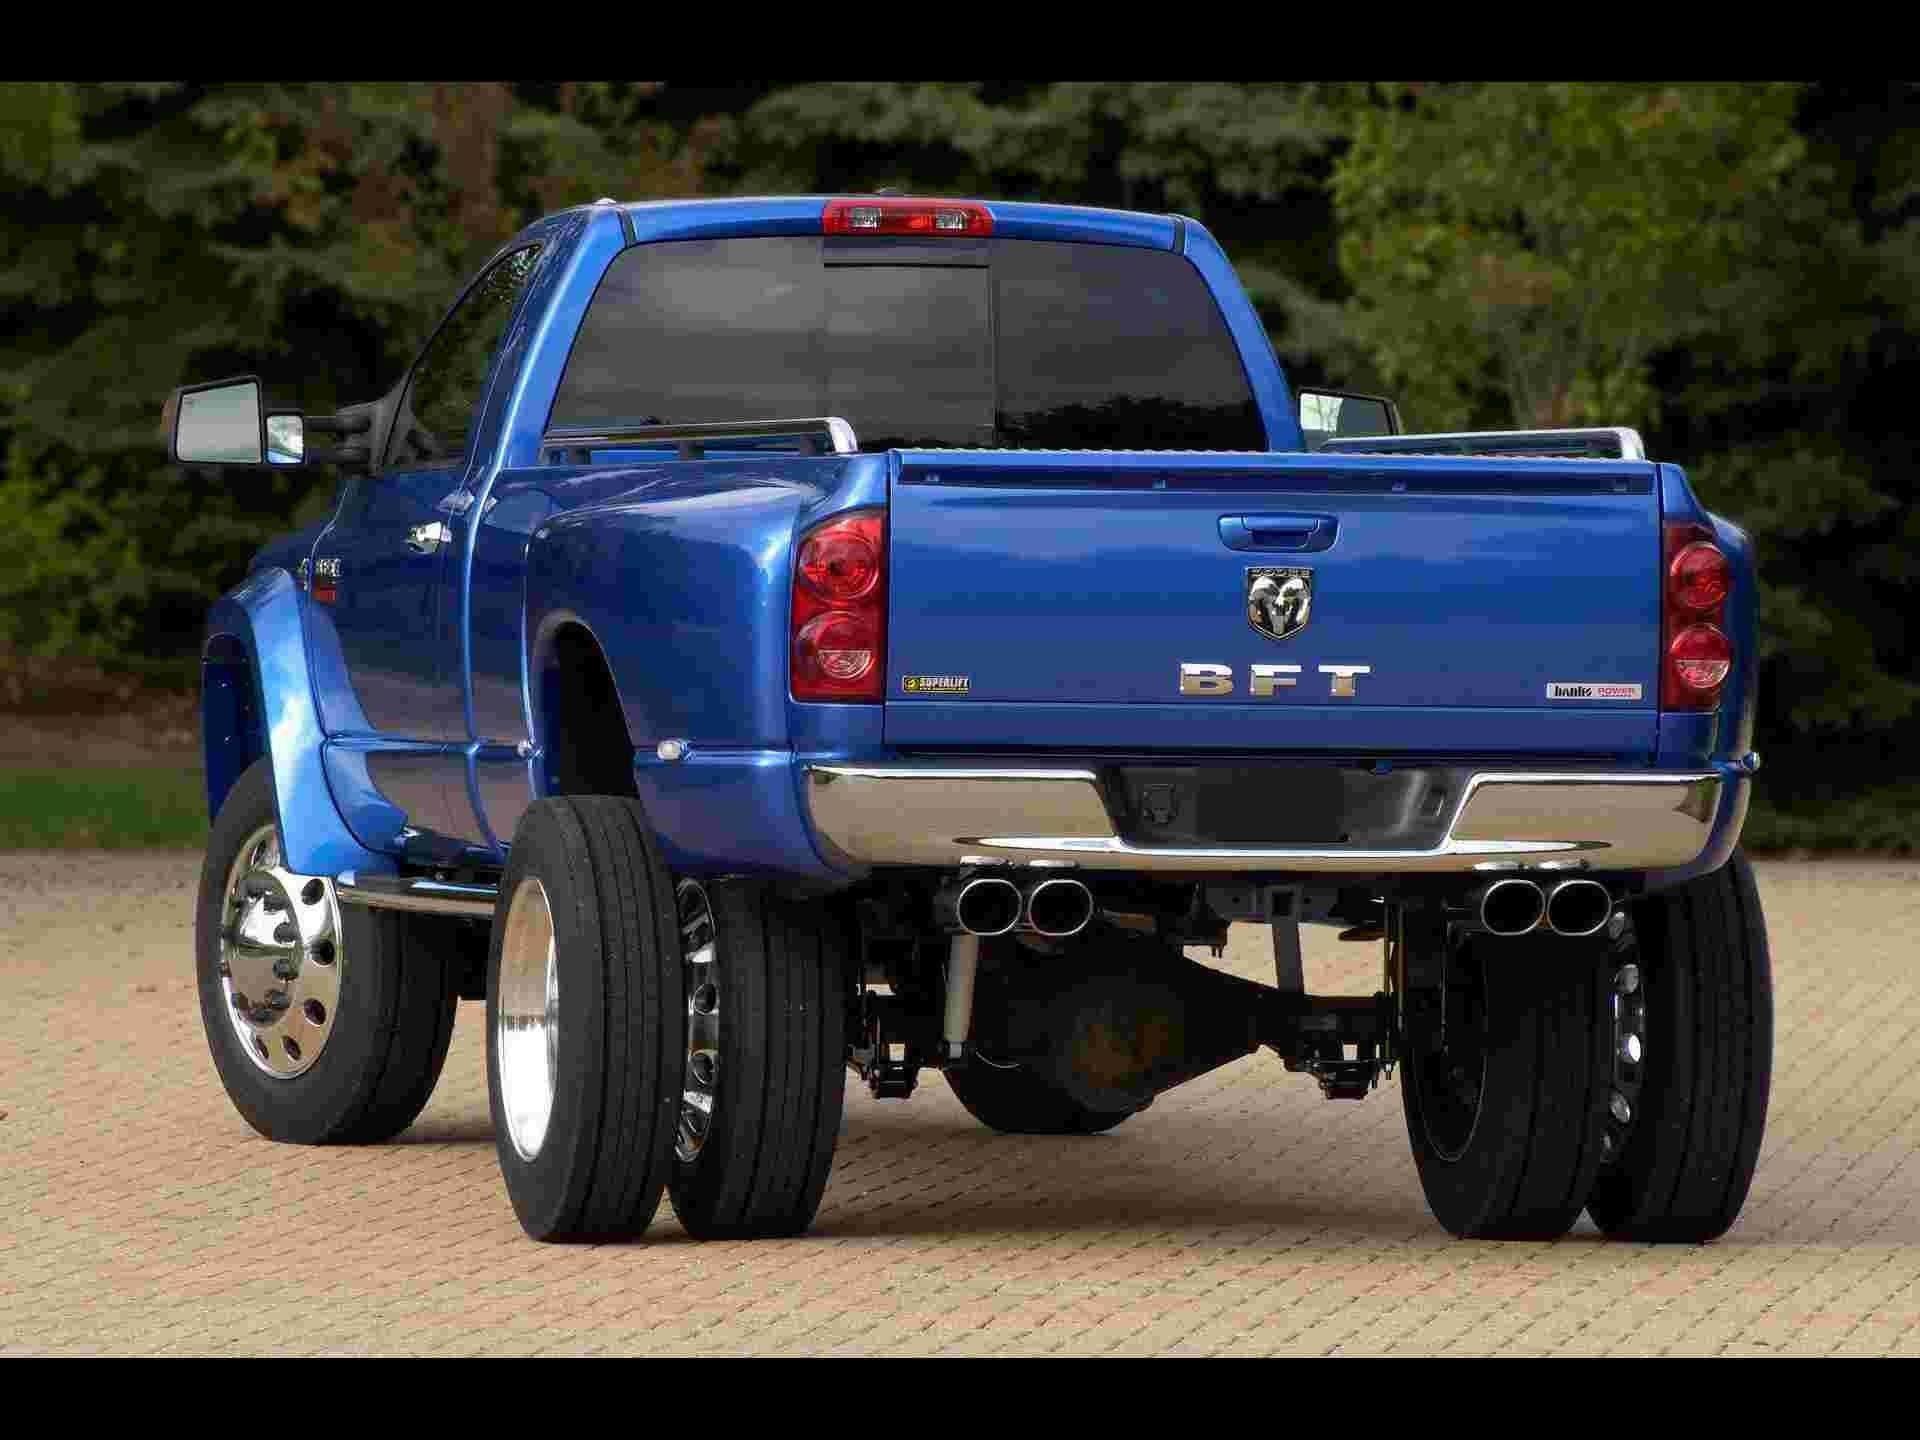 Lifted Trucks Wallpaper background picture